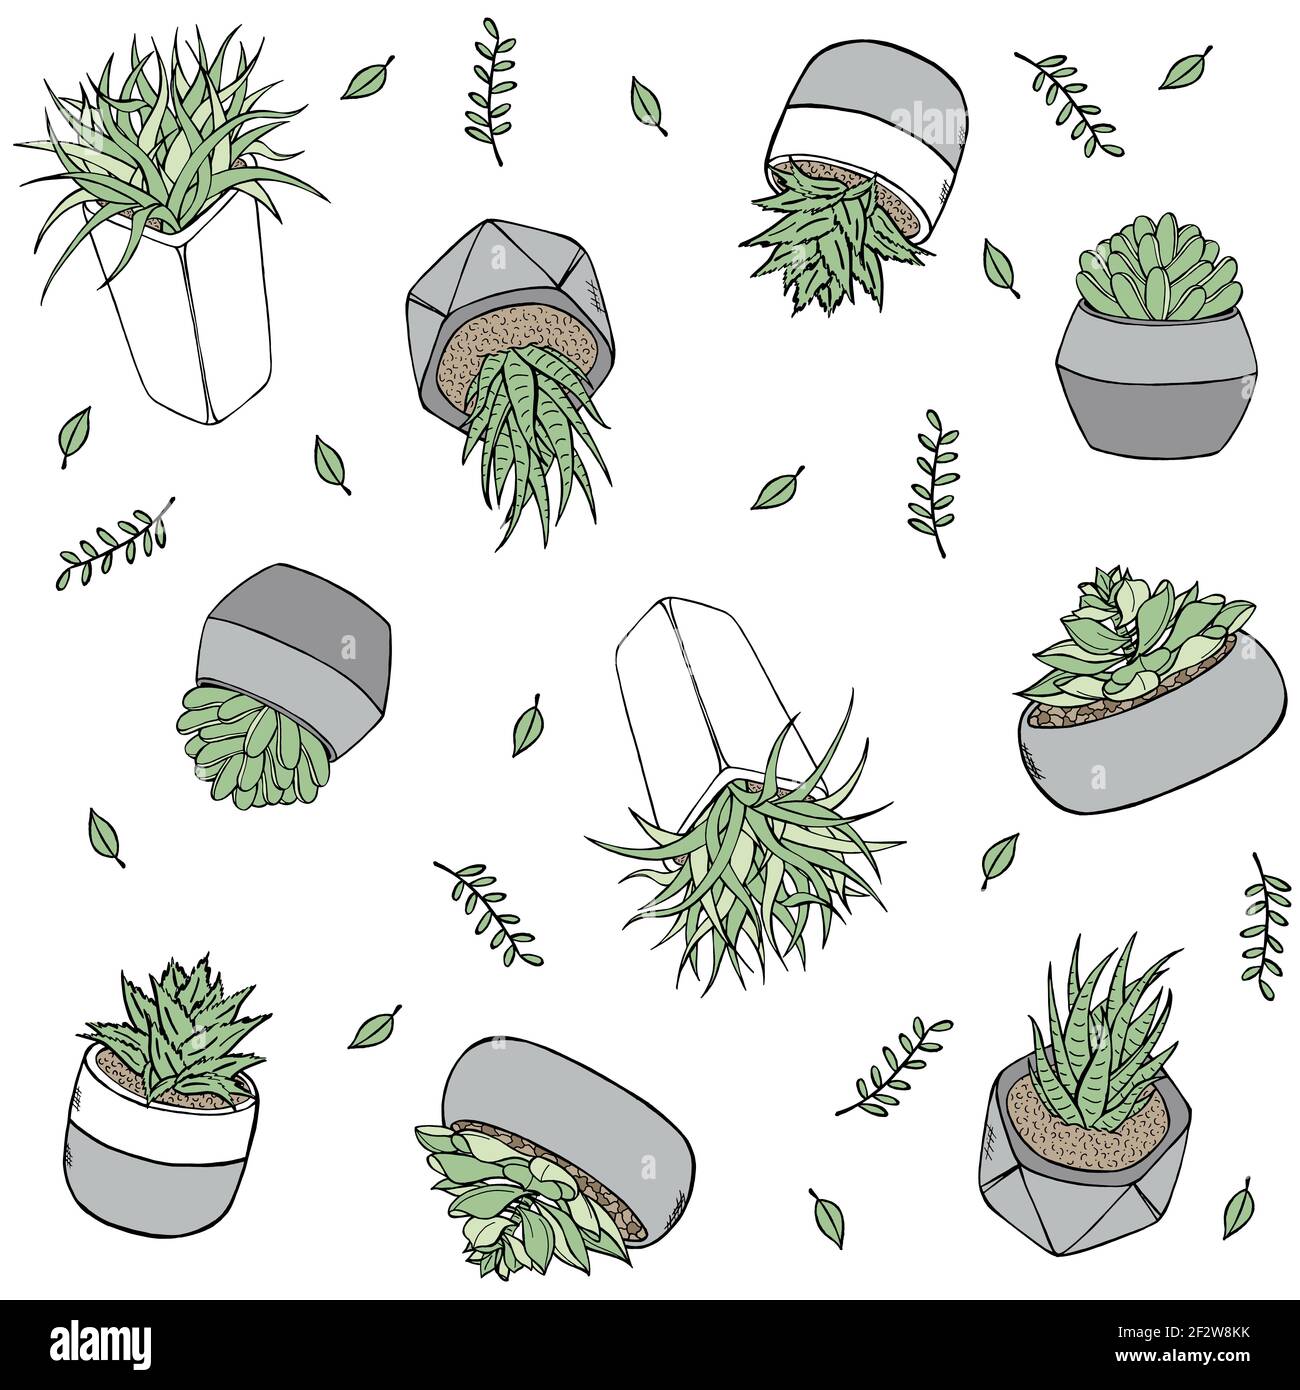 Botanical Seamless Pattern Doodle style illustration in vector format. Hand drawn Plants in pots Stock Vector